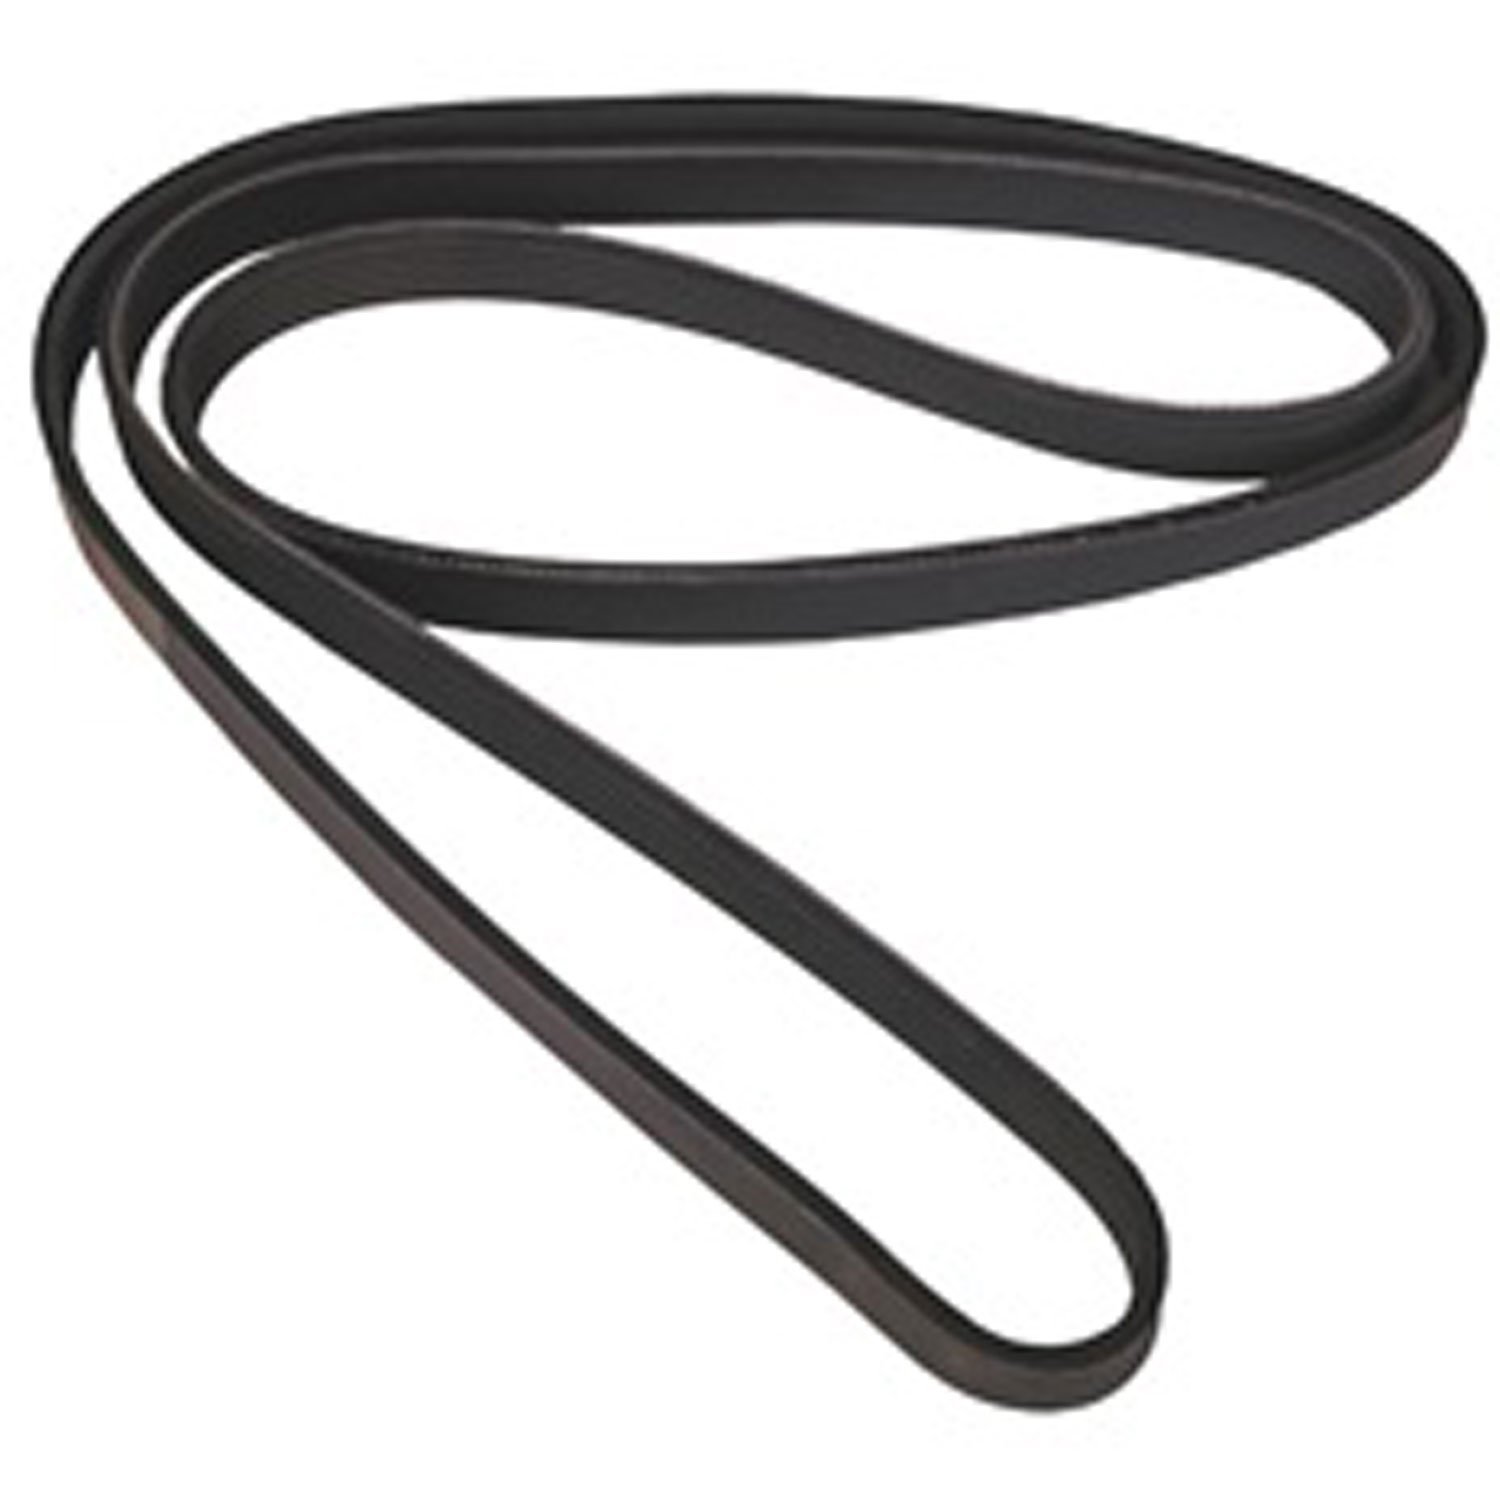 Stock replacement serpentine belt from Omix-ADA, Fits 07-11 Jeep Wrangler with air conditioning.